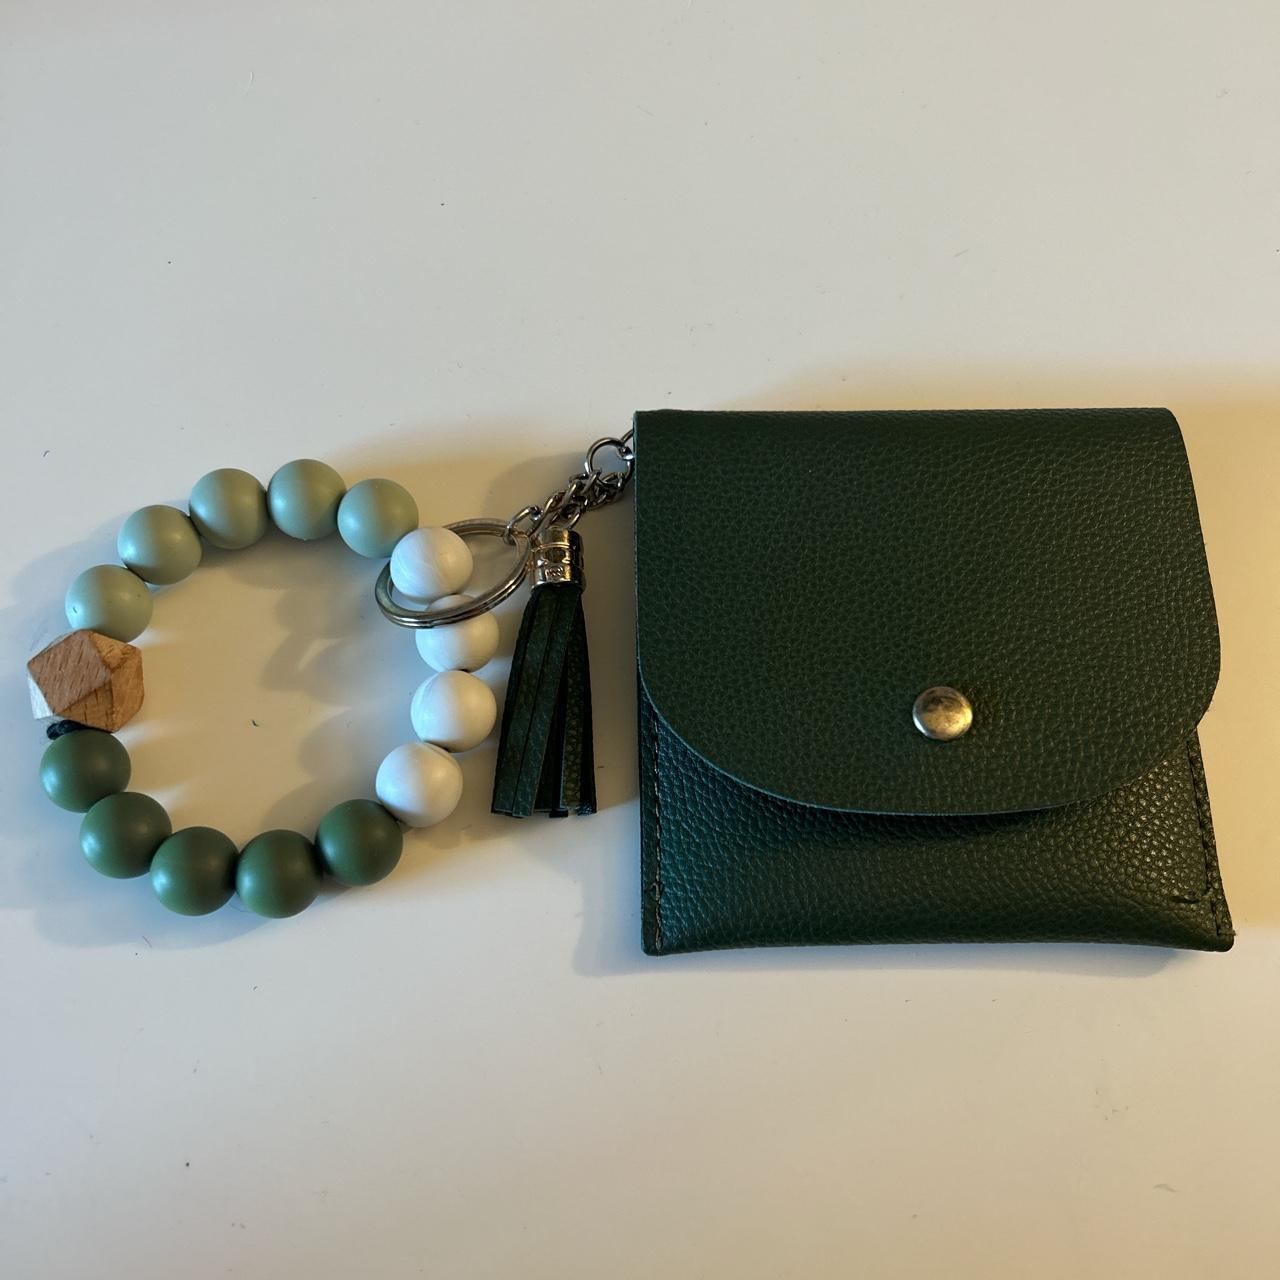 Green wallet with cute holding bracelet Barely used - Depop